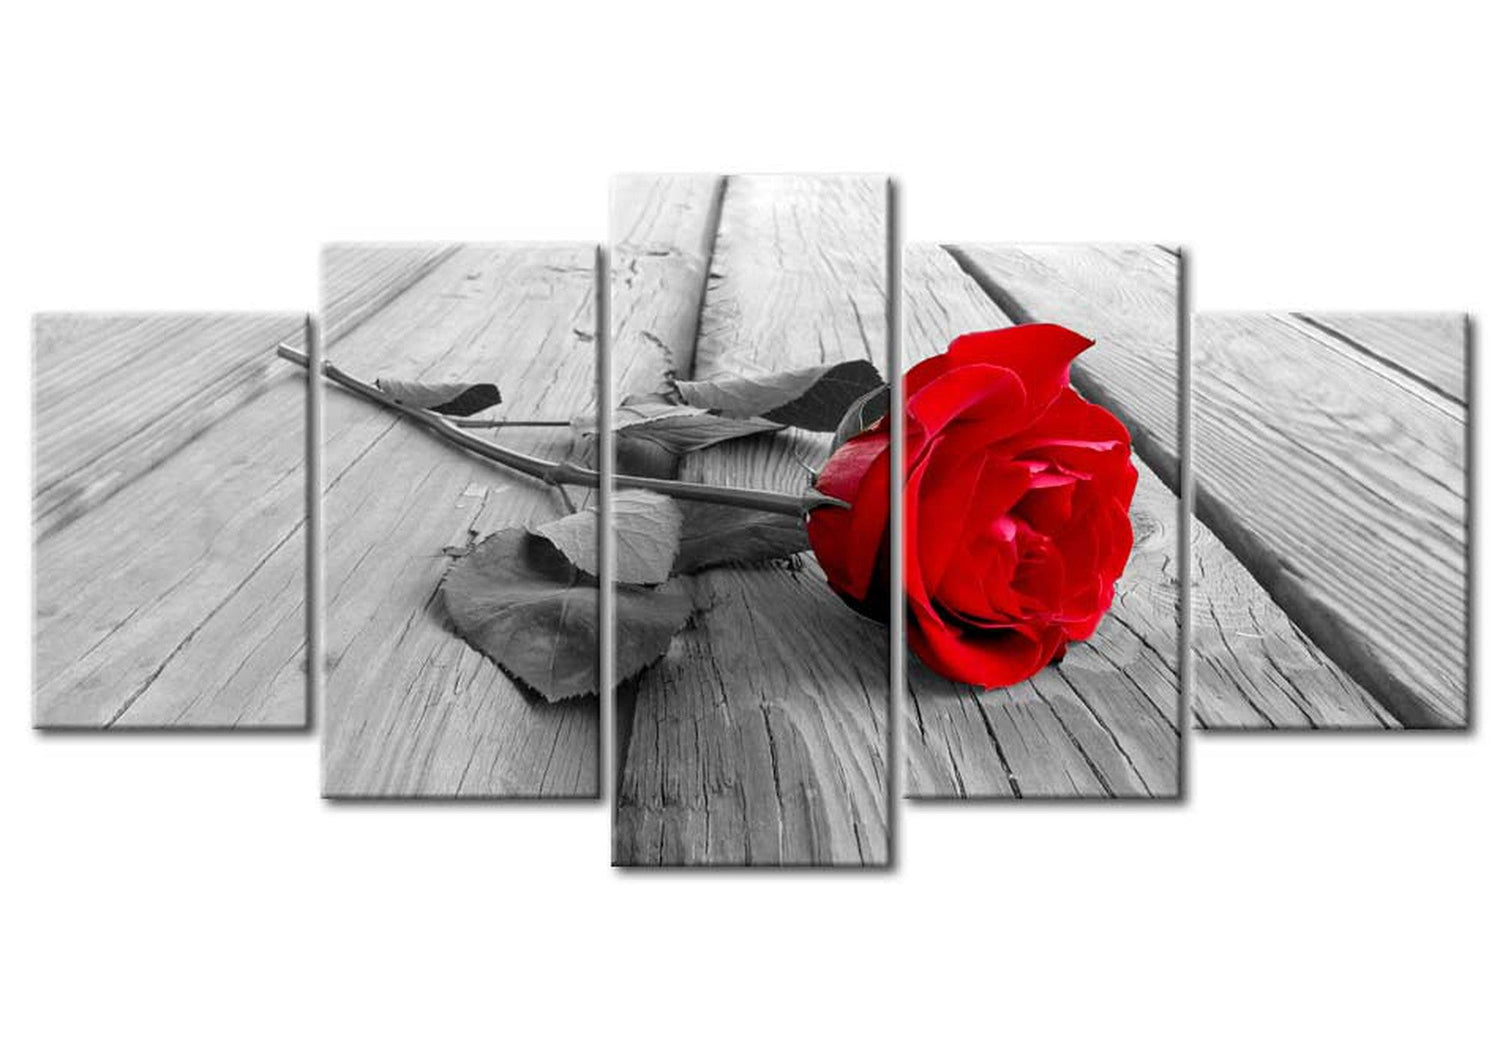 Floral Canvas Wall Art - Red Rose On Wood - 5 Pieces